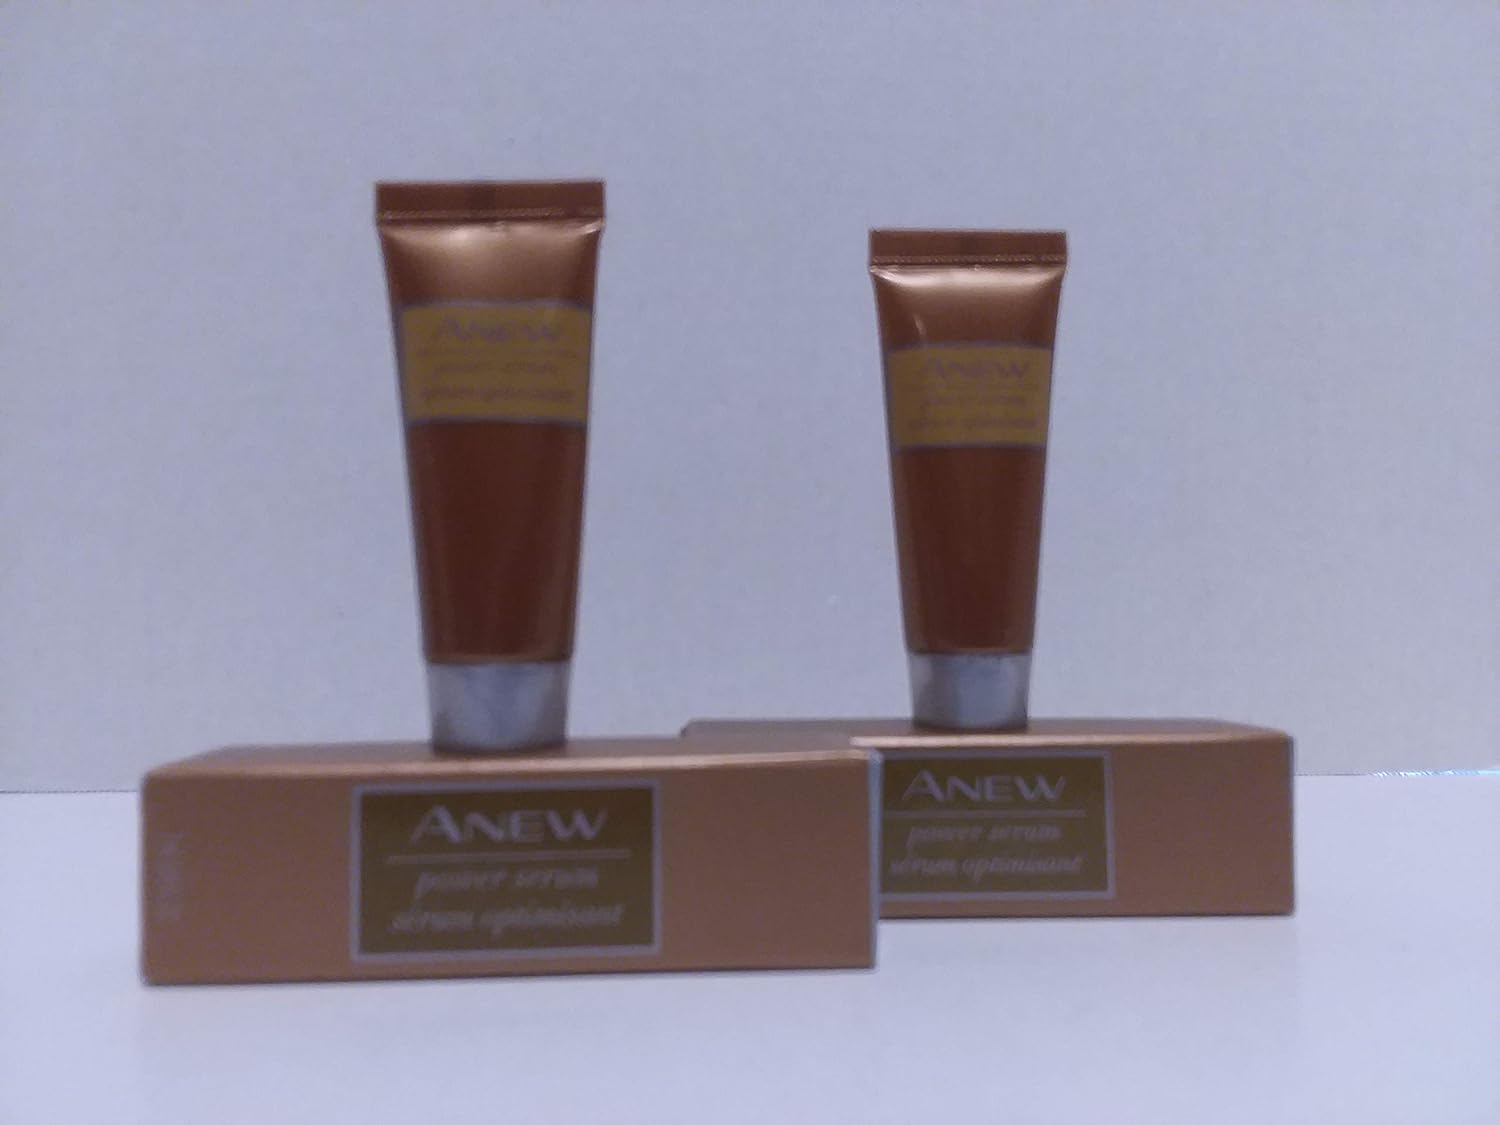 Avon Anew Power Serum Trial Size - Lot of 2